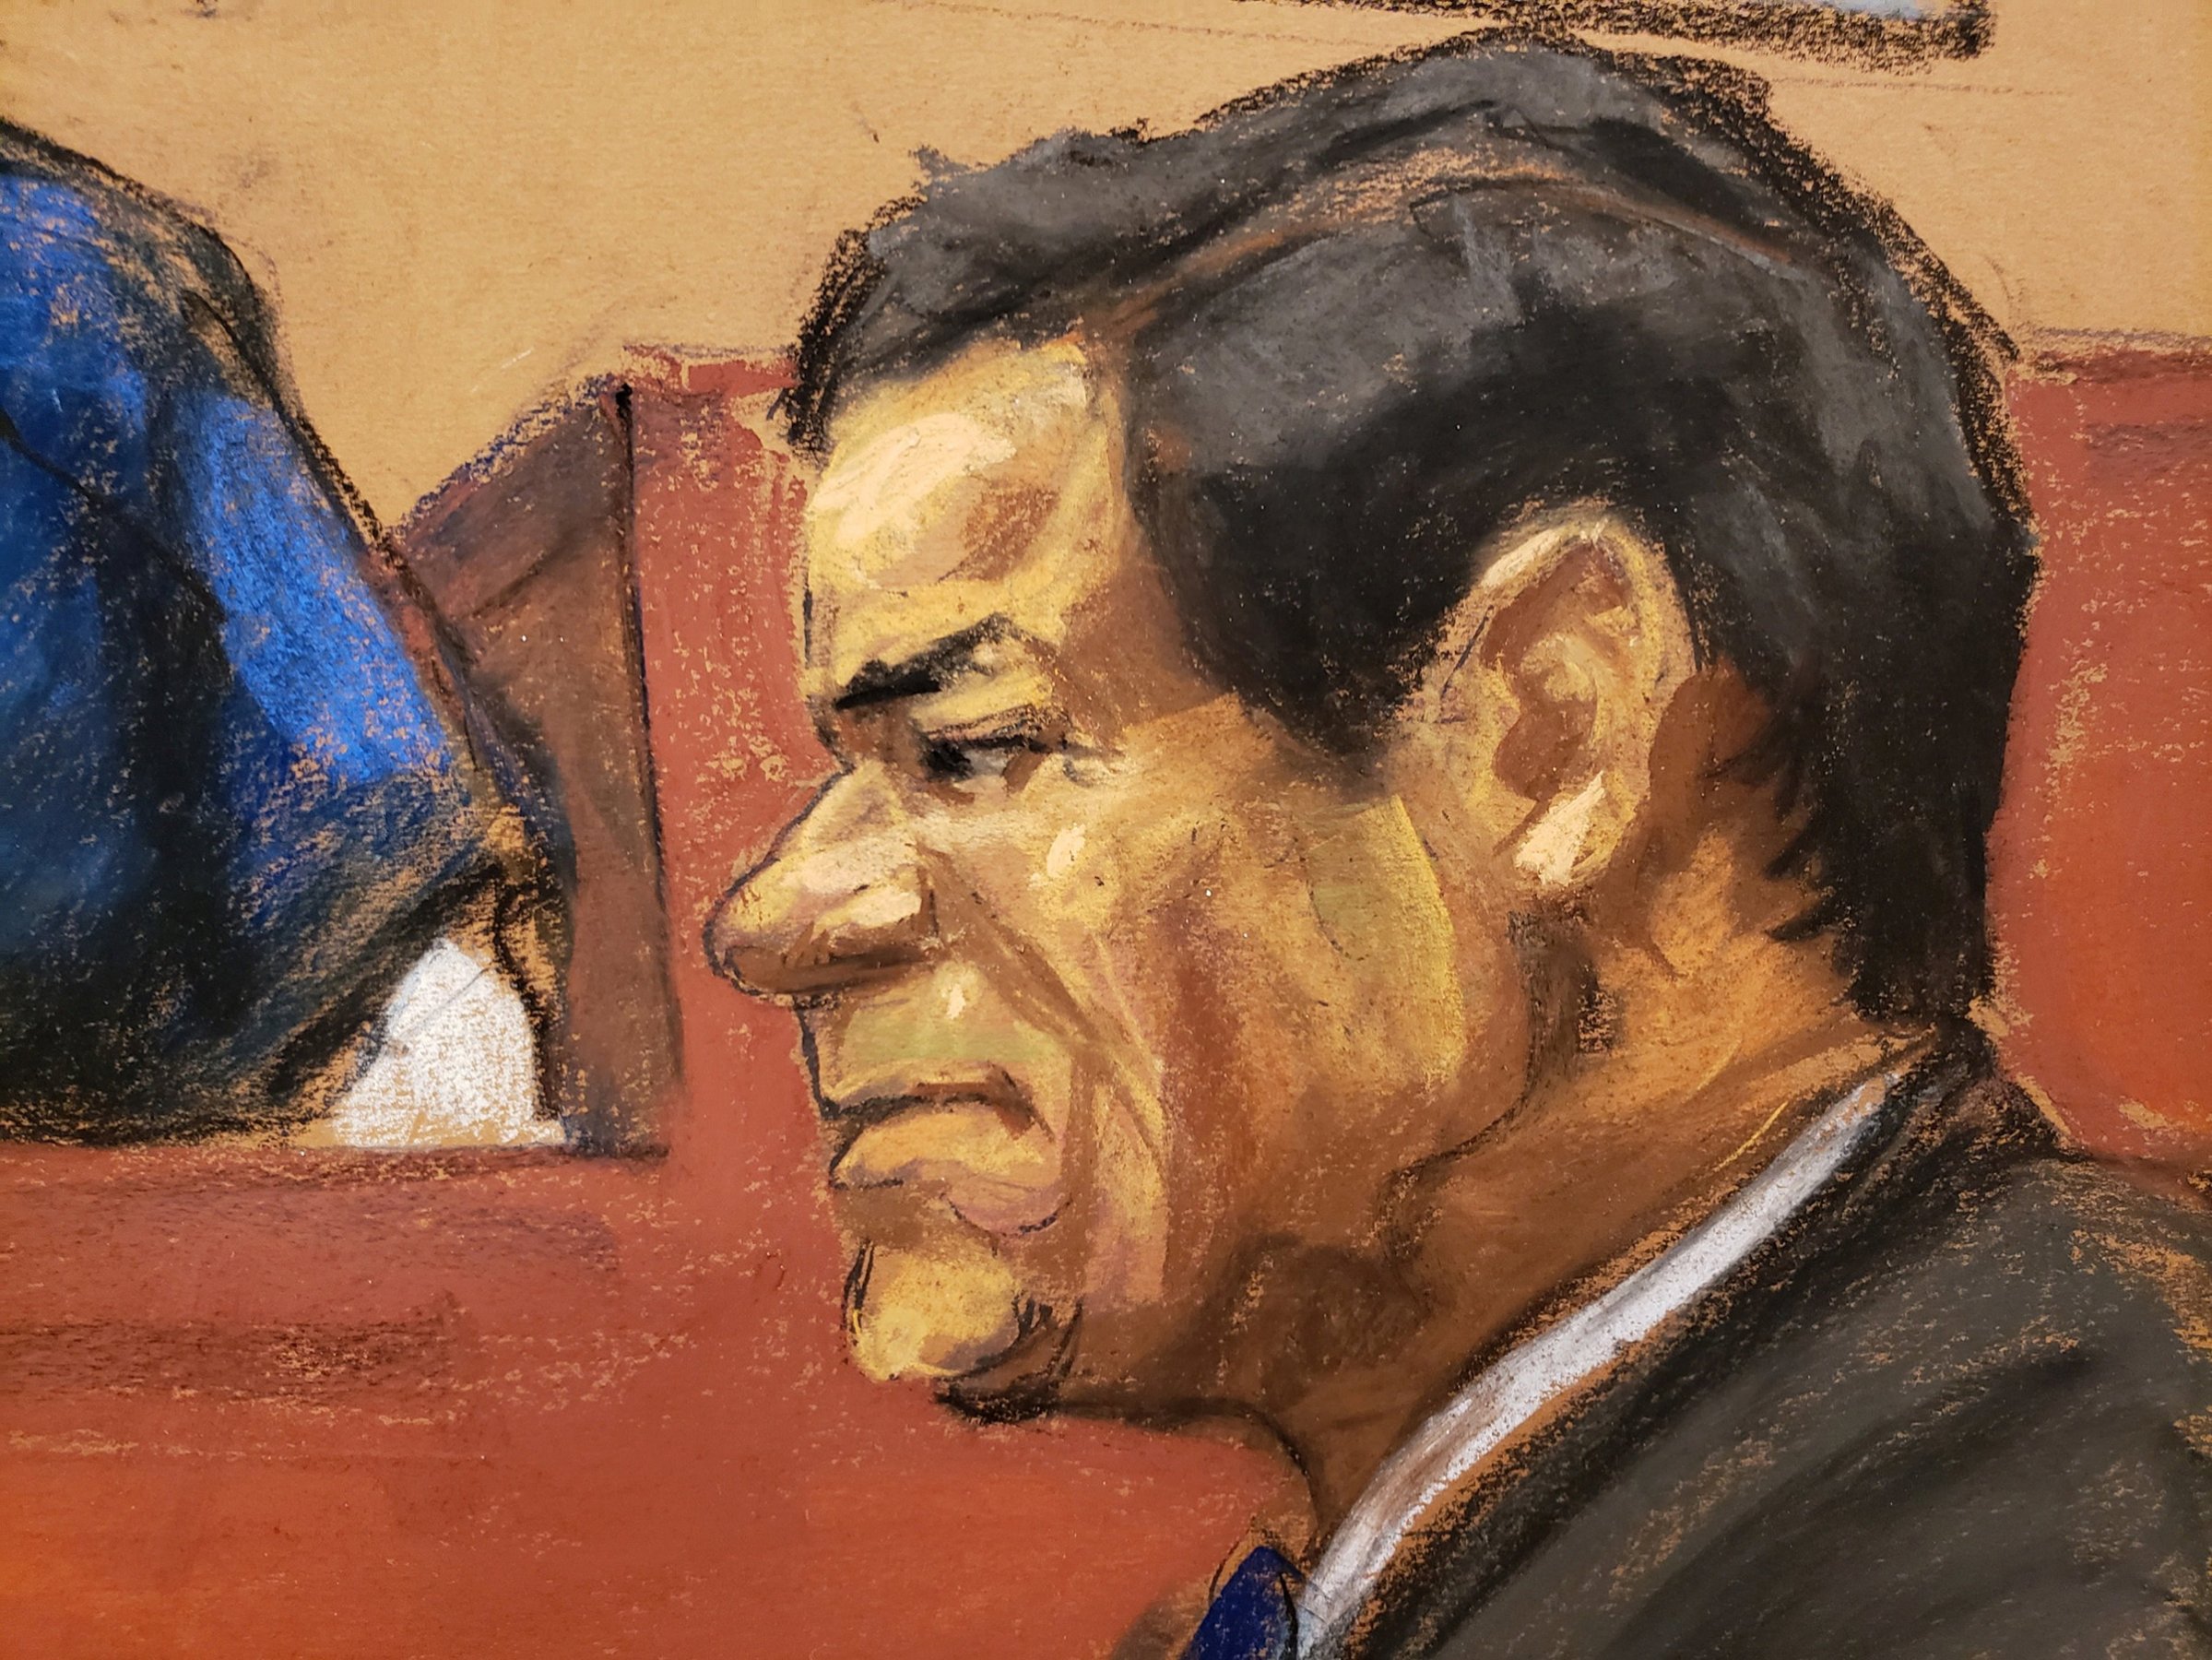 A courtroom sketch of The accused Mexican drug lord Joaquin "El Chapo" Guzman listens to a testimony by Isaias Valdez Rios